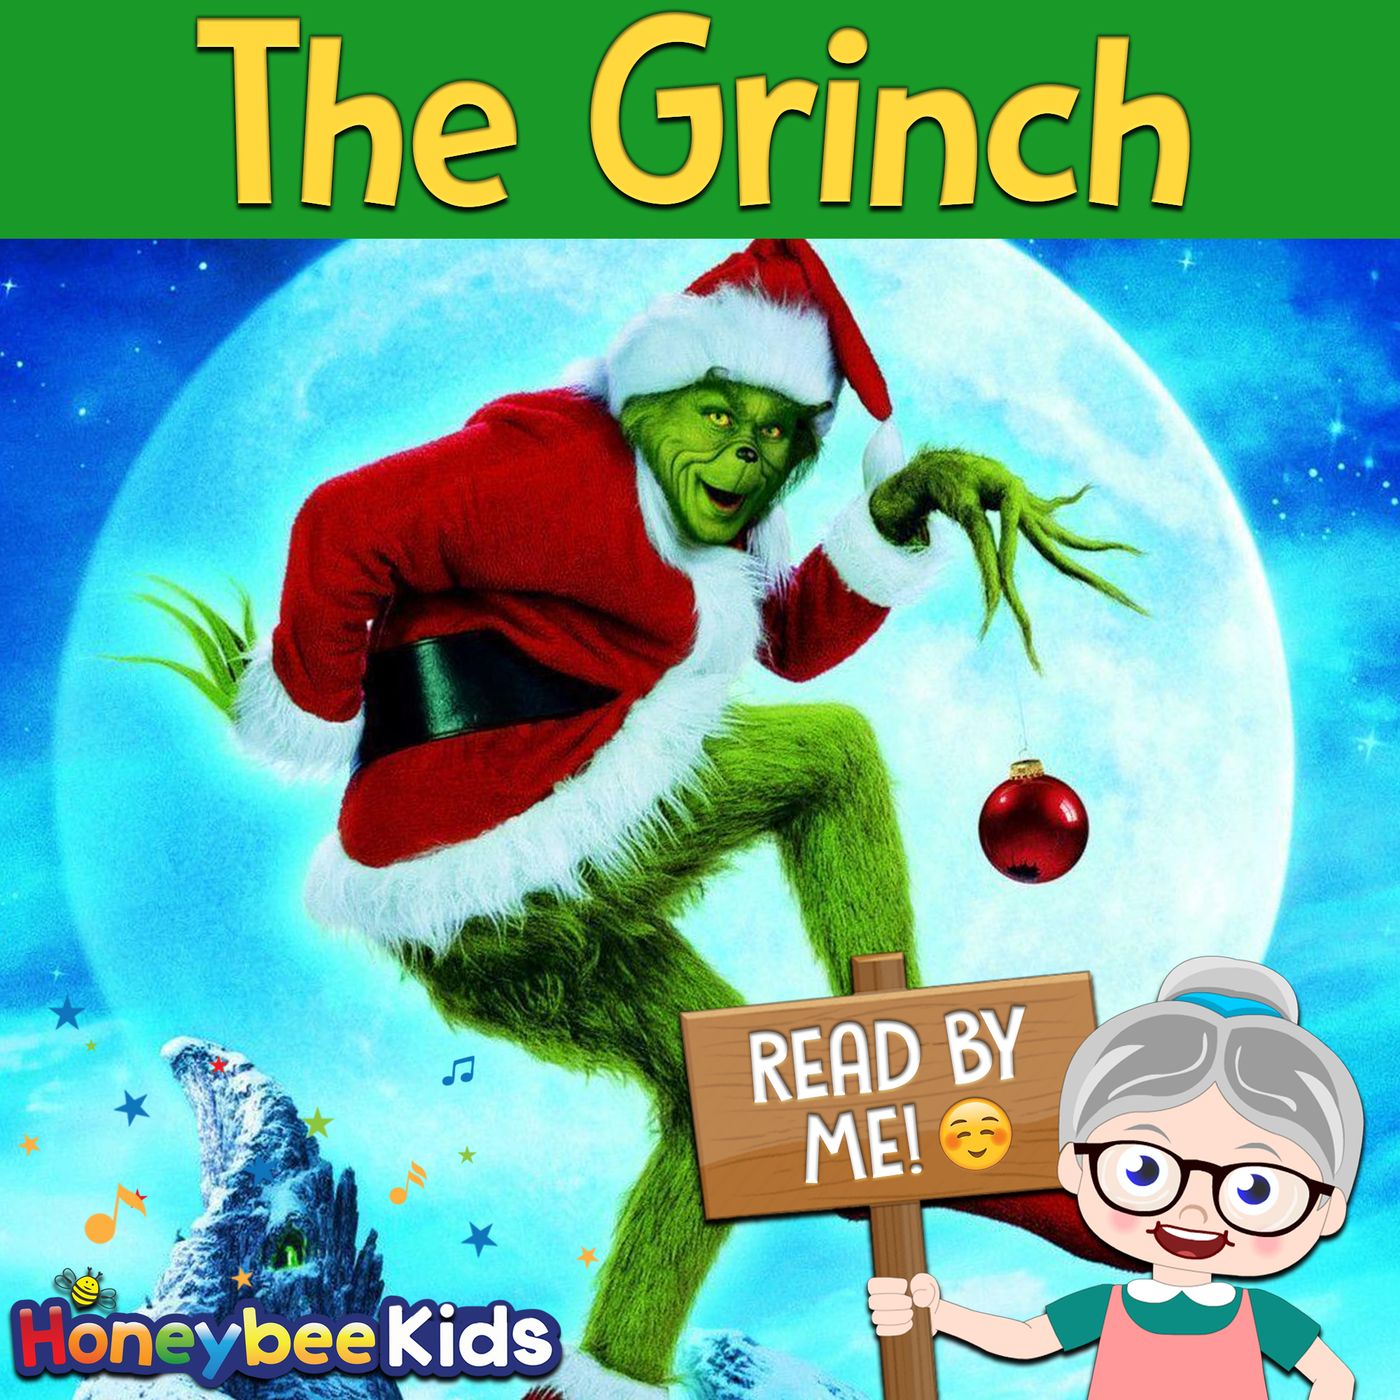 The Grinch - Christmas Story #1